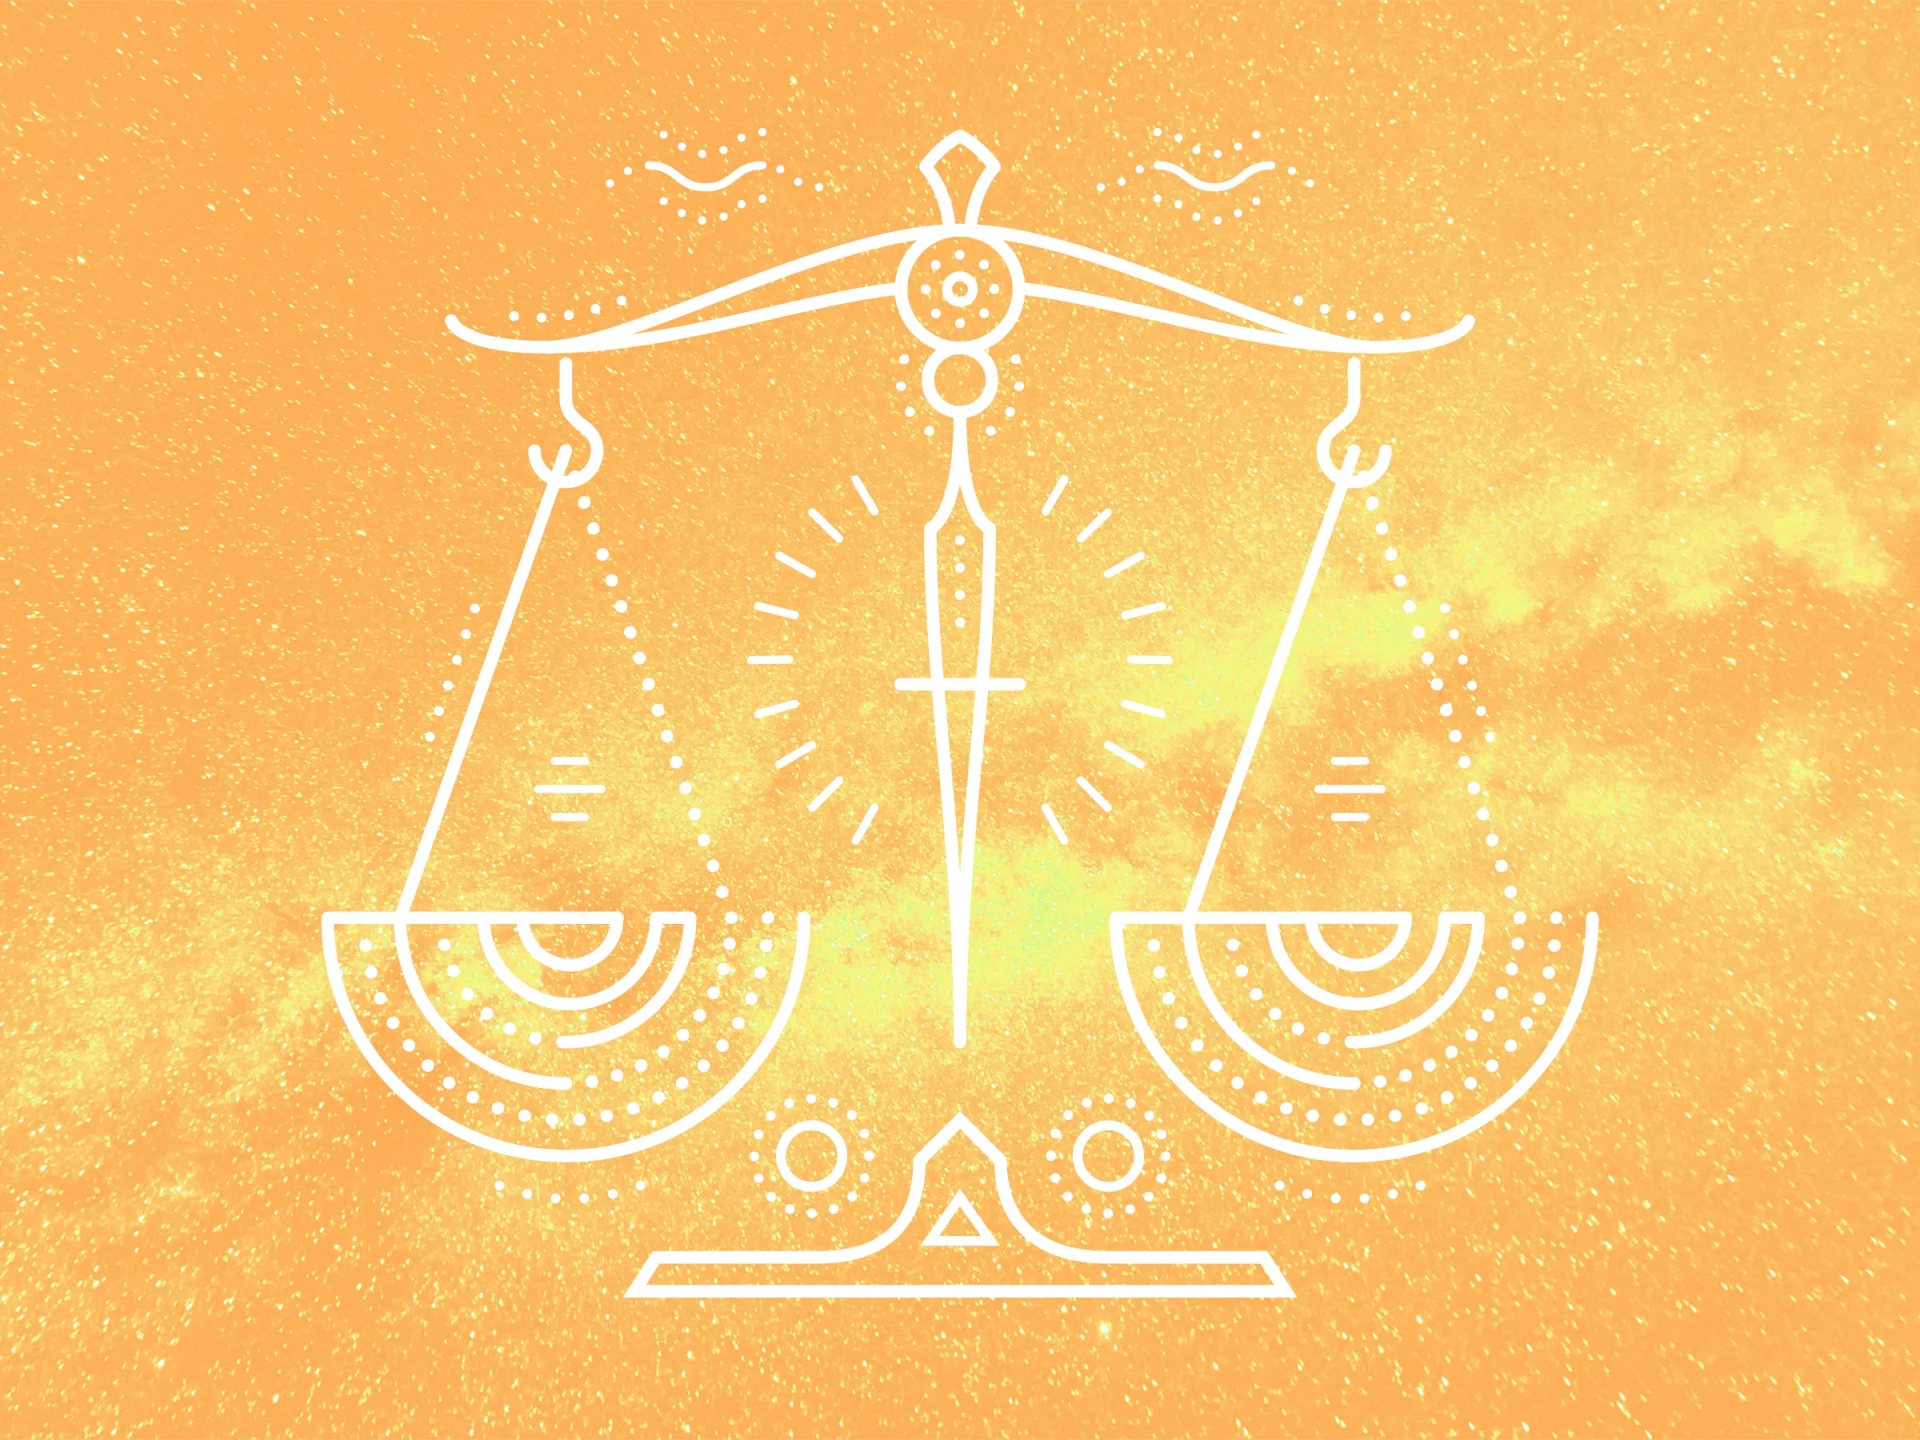 Libra Weekly Horoscope (March 22-28): Astrological Predictions for Love, Financial, Career and Health